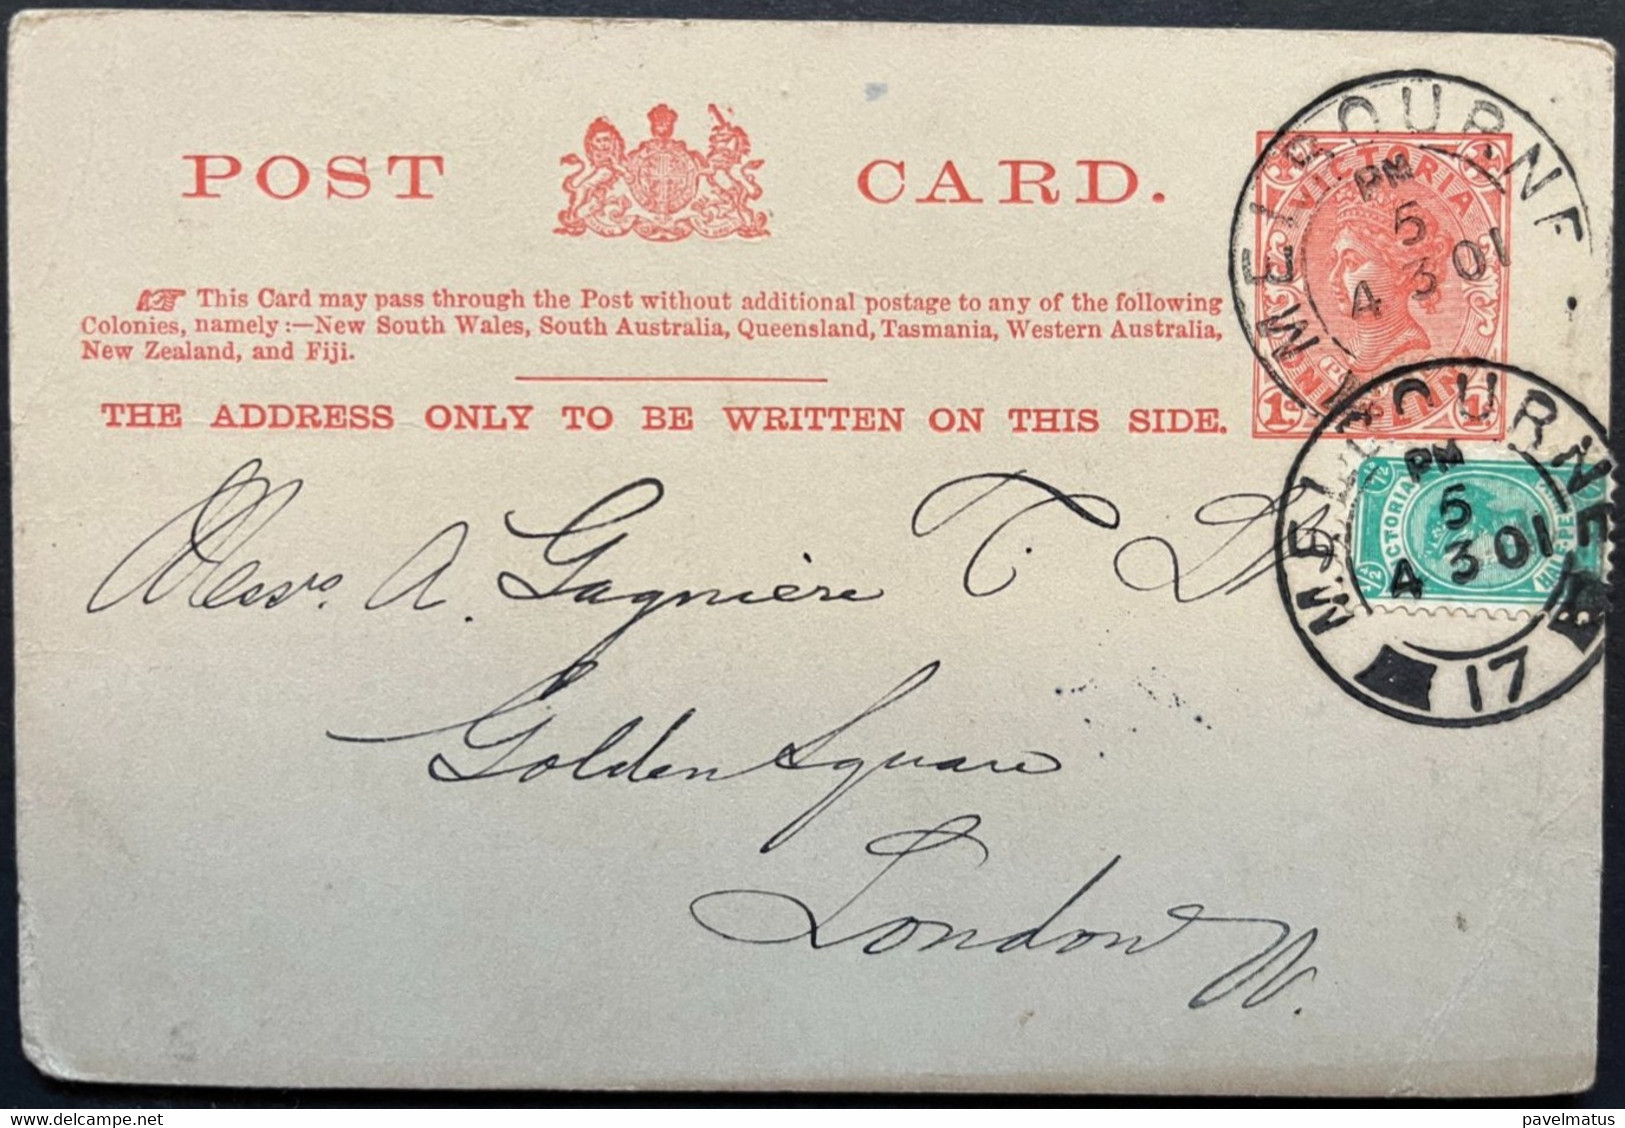 Victoria 1901 Uprated Postal Card Melbourne 4.3.1901 To London UK Nice Condition - Covers & Documents